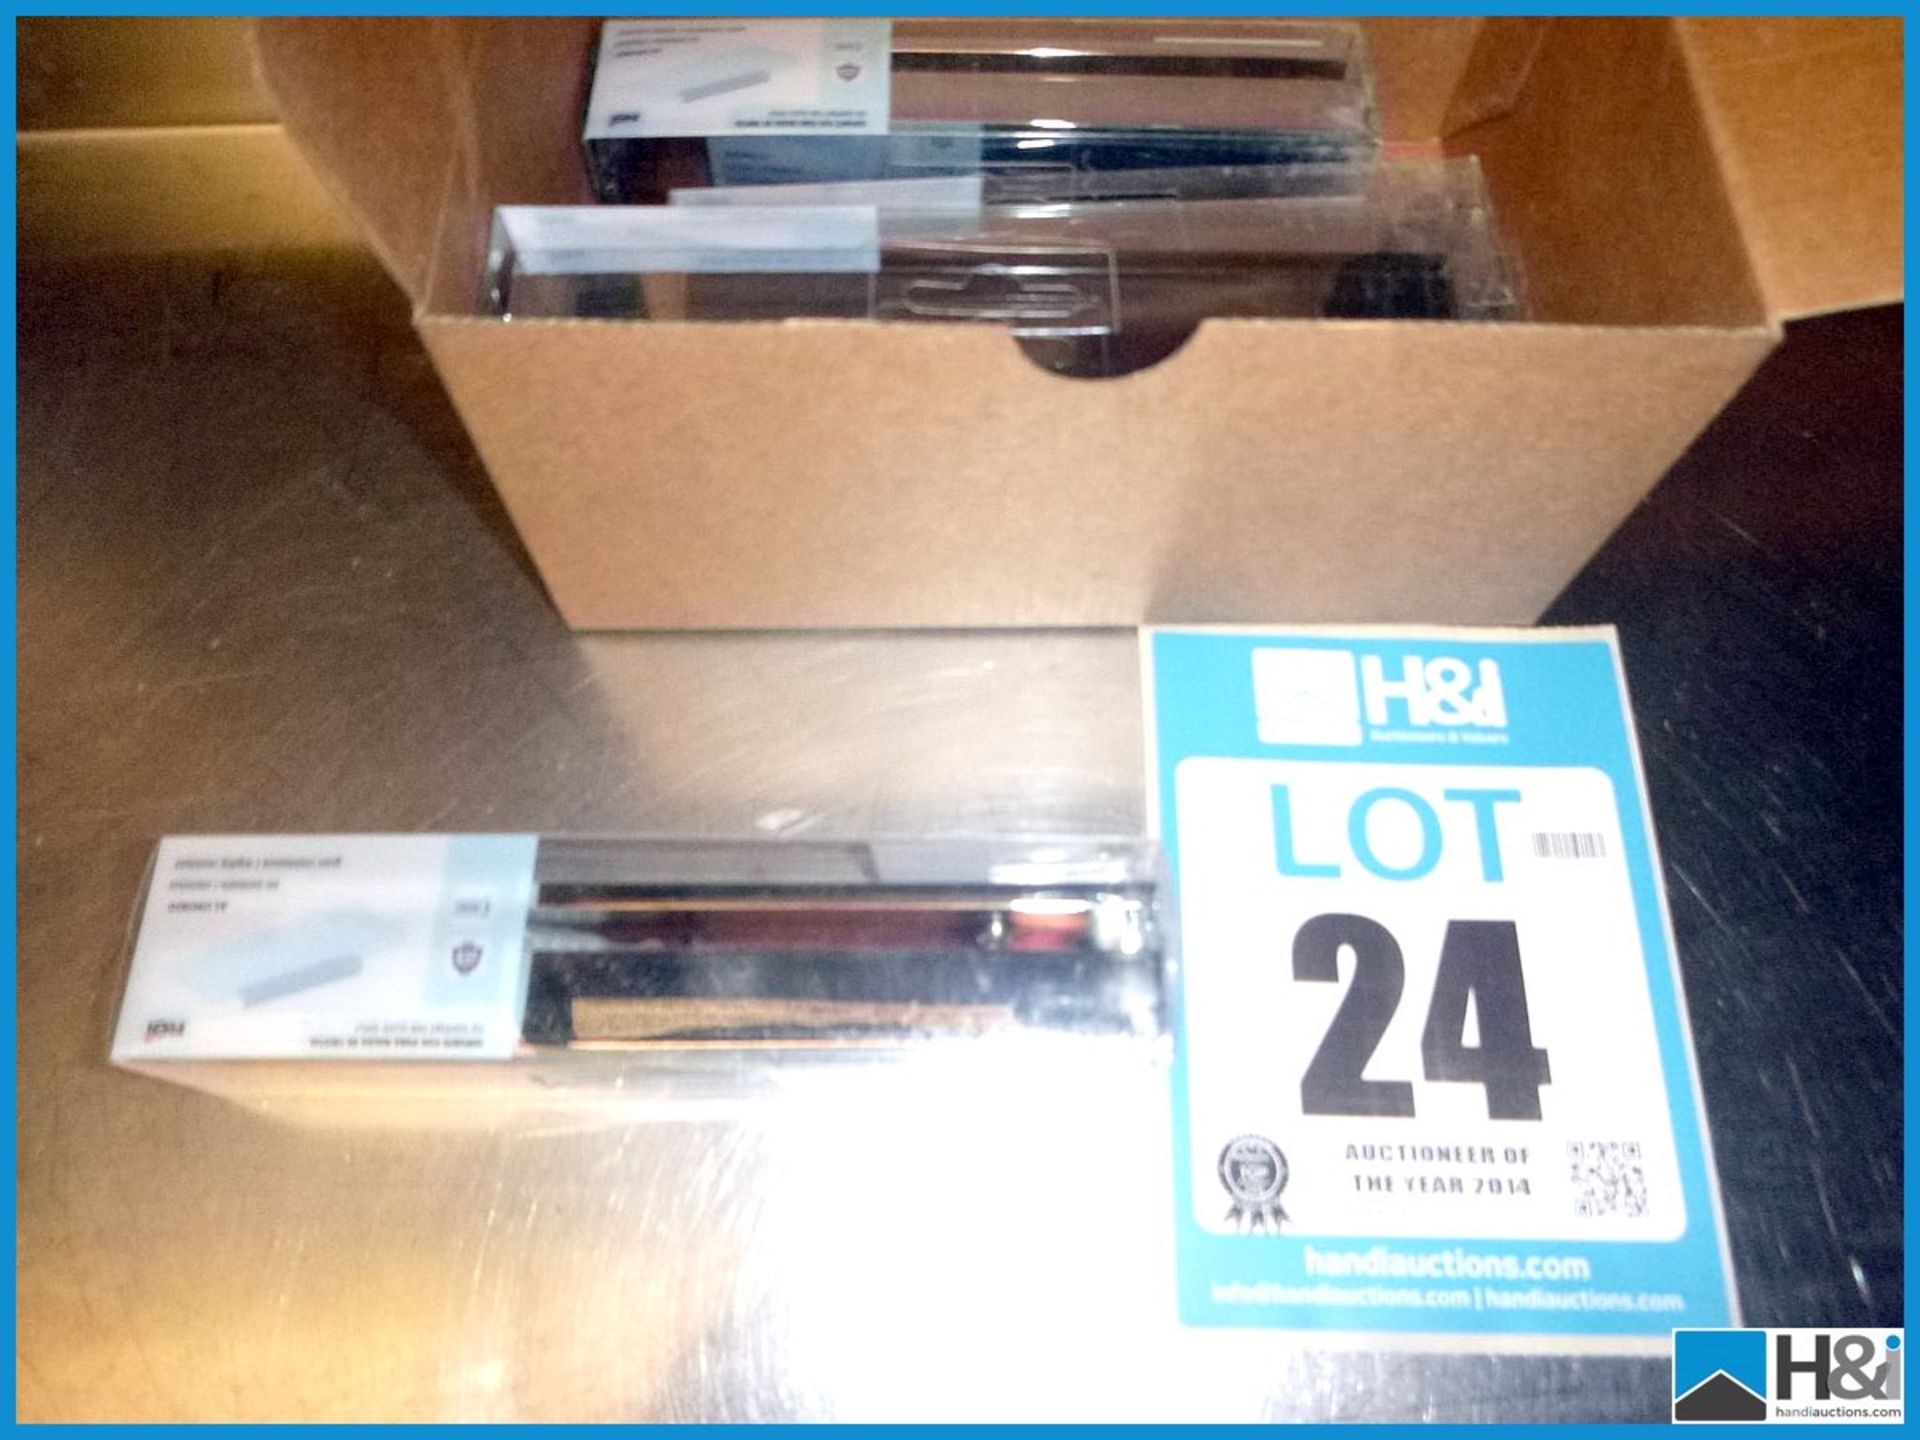 5 OFF PACKS - REI POLISHED CHROME SHELVING BRACKETS, PART NUMBER - R640, UNUSED AND RETAIL